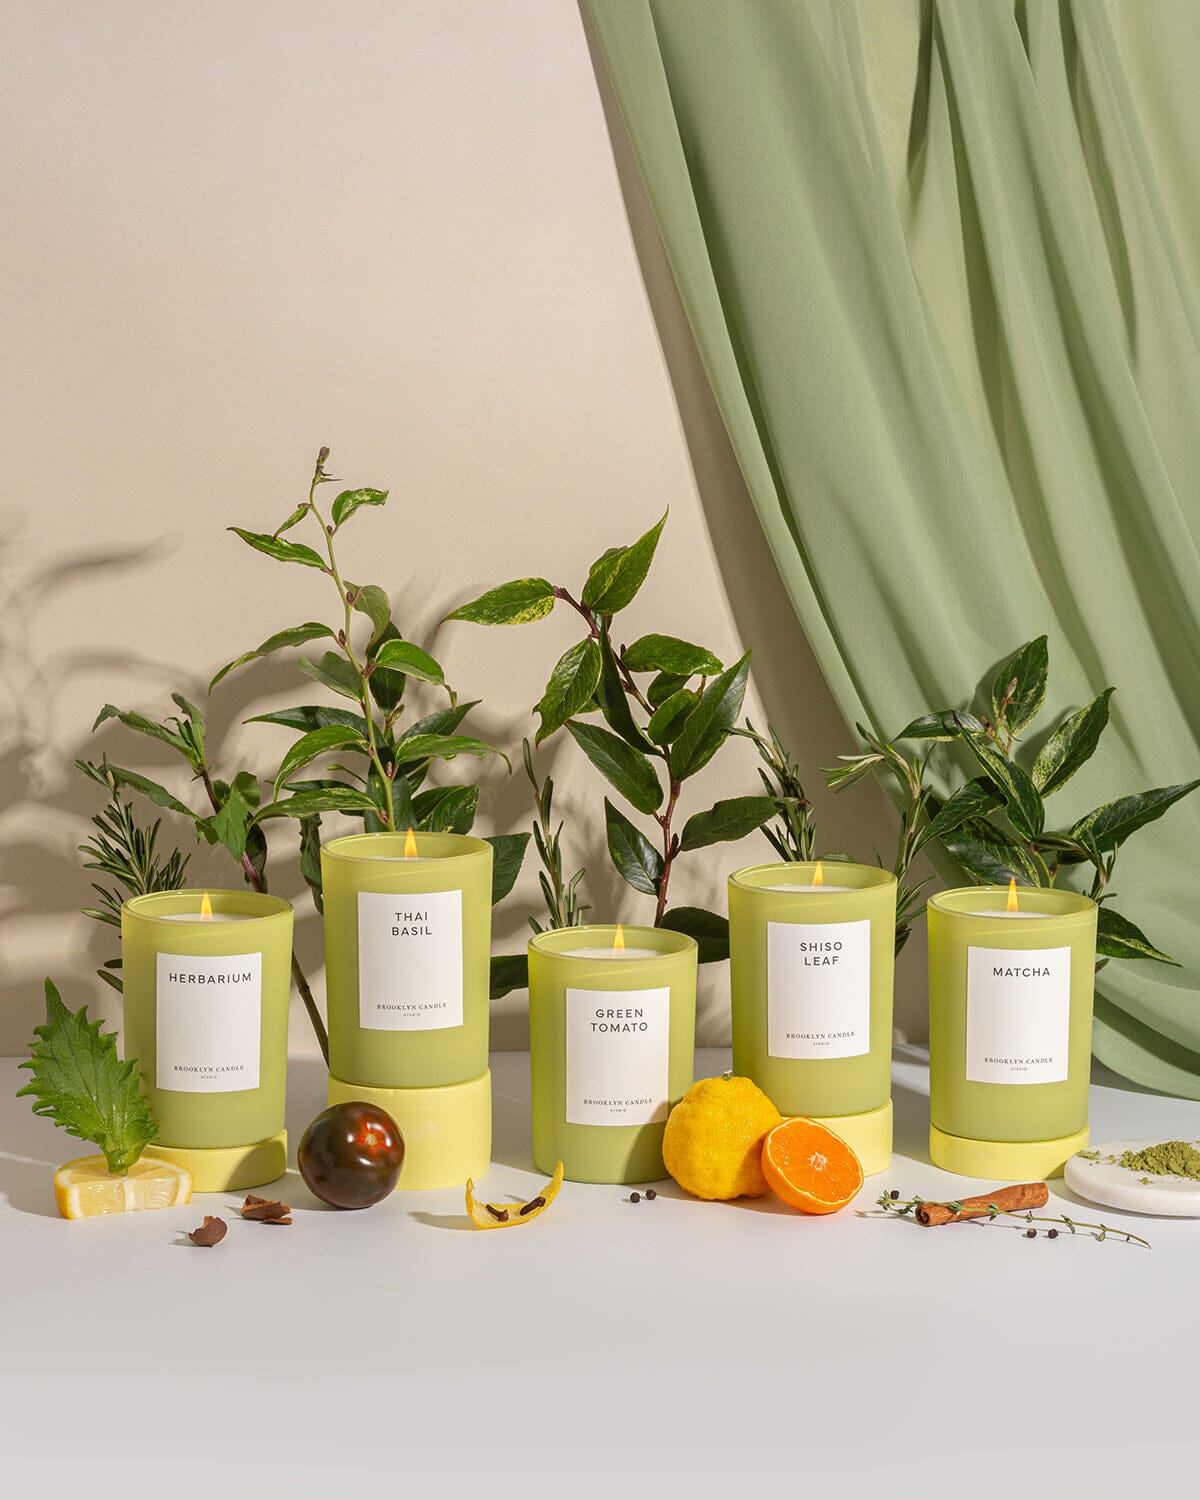 Shiso Leaf Limited Edition Candle Herbarium Collection Brooklyn Candle Studio 